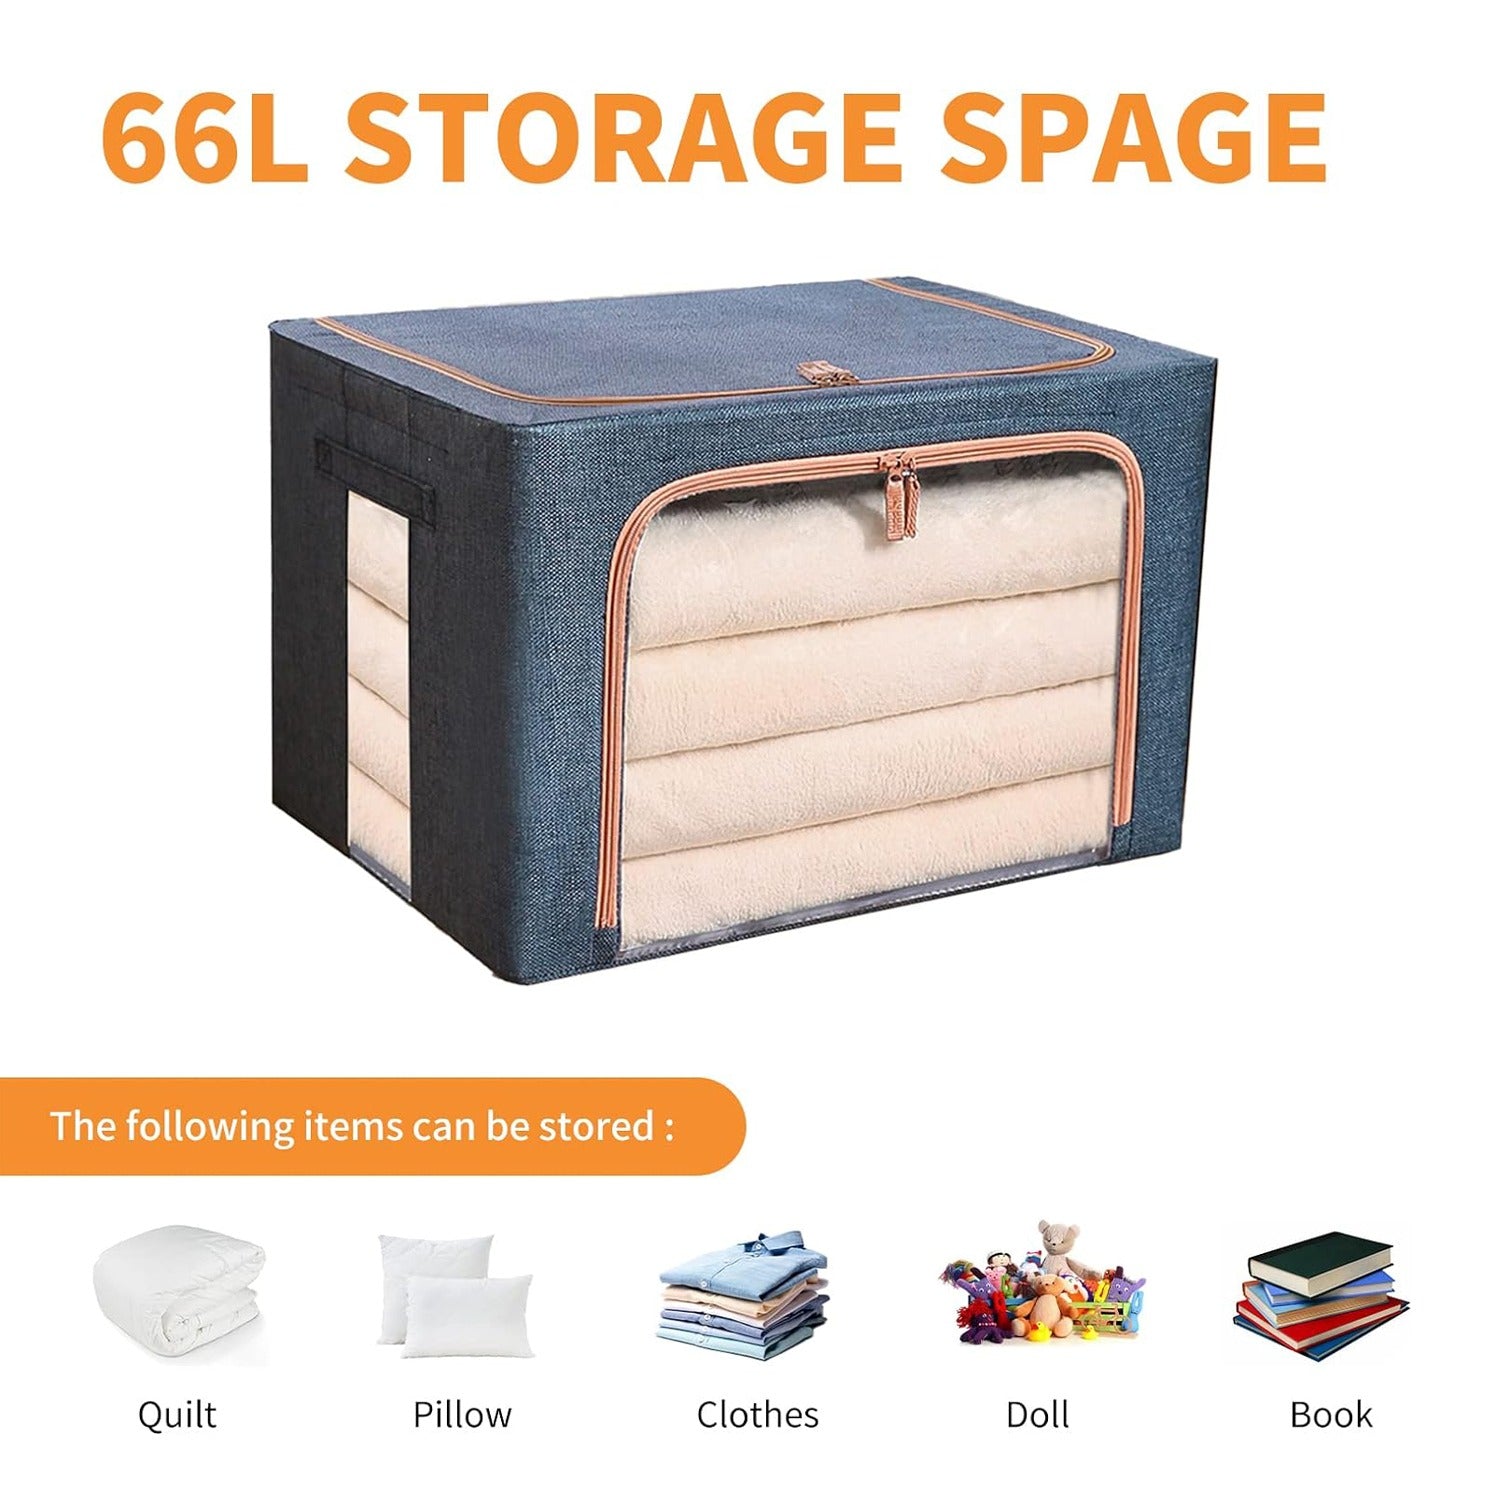 2 x 66L Foldable Large Capacity Cloth Storage, perfect for organizing clothes, bedsheets, pillows, and various other items